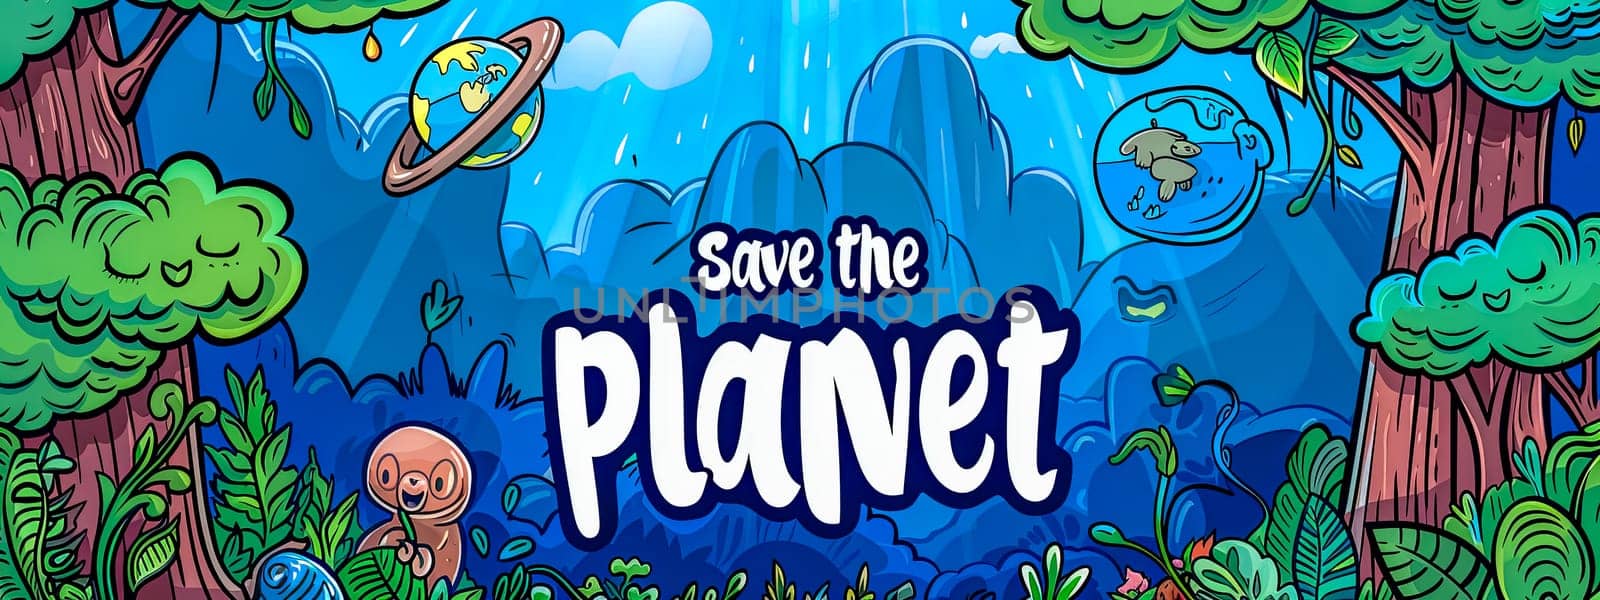 Save the planet eco concept illustration by Edophoto